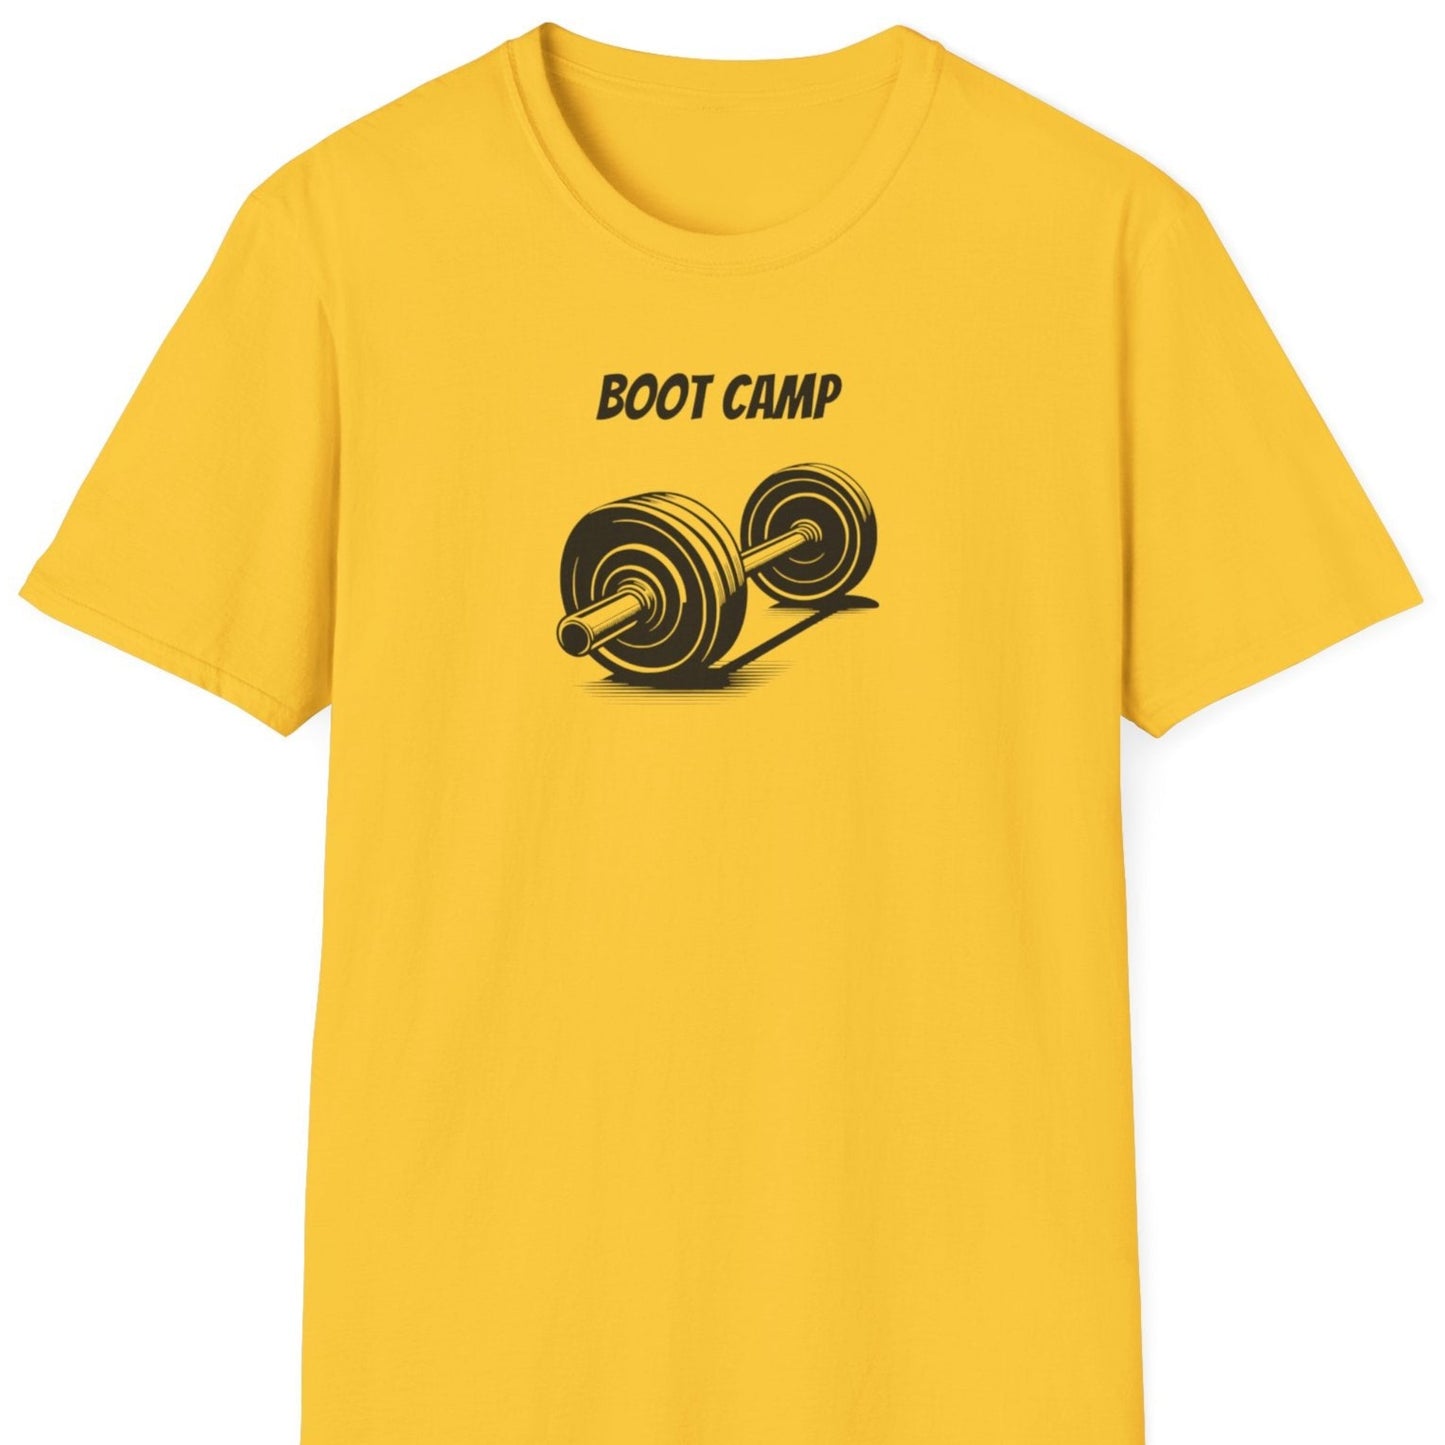 Picture of yellow t shirt saying boot camp